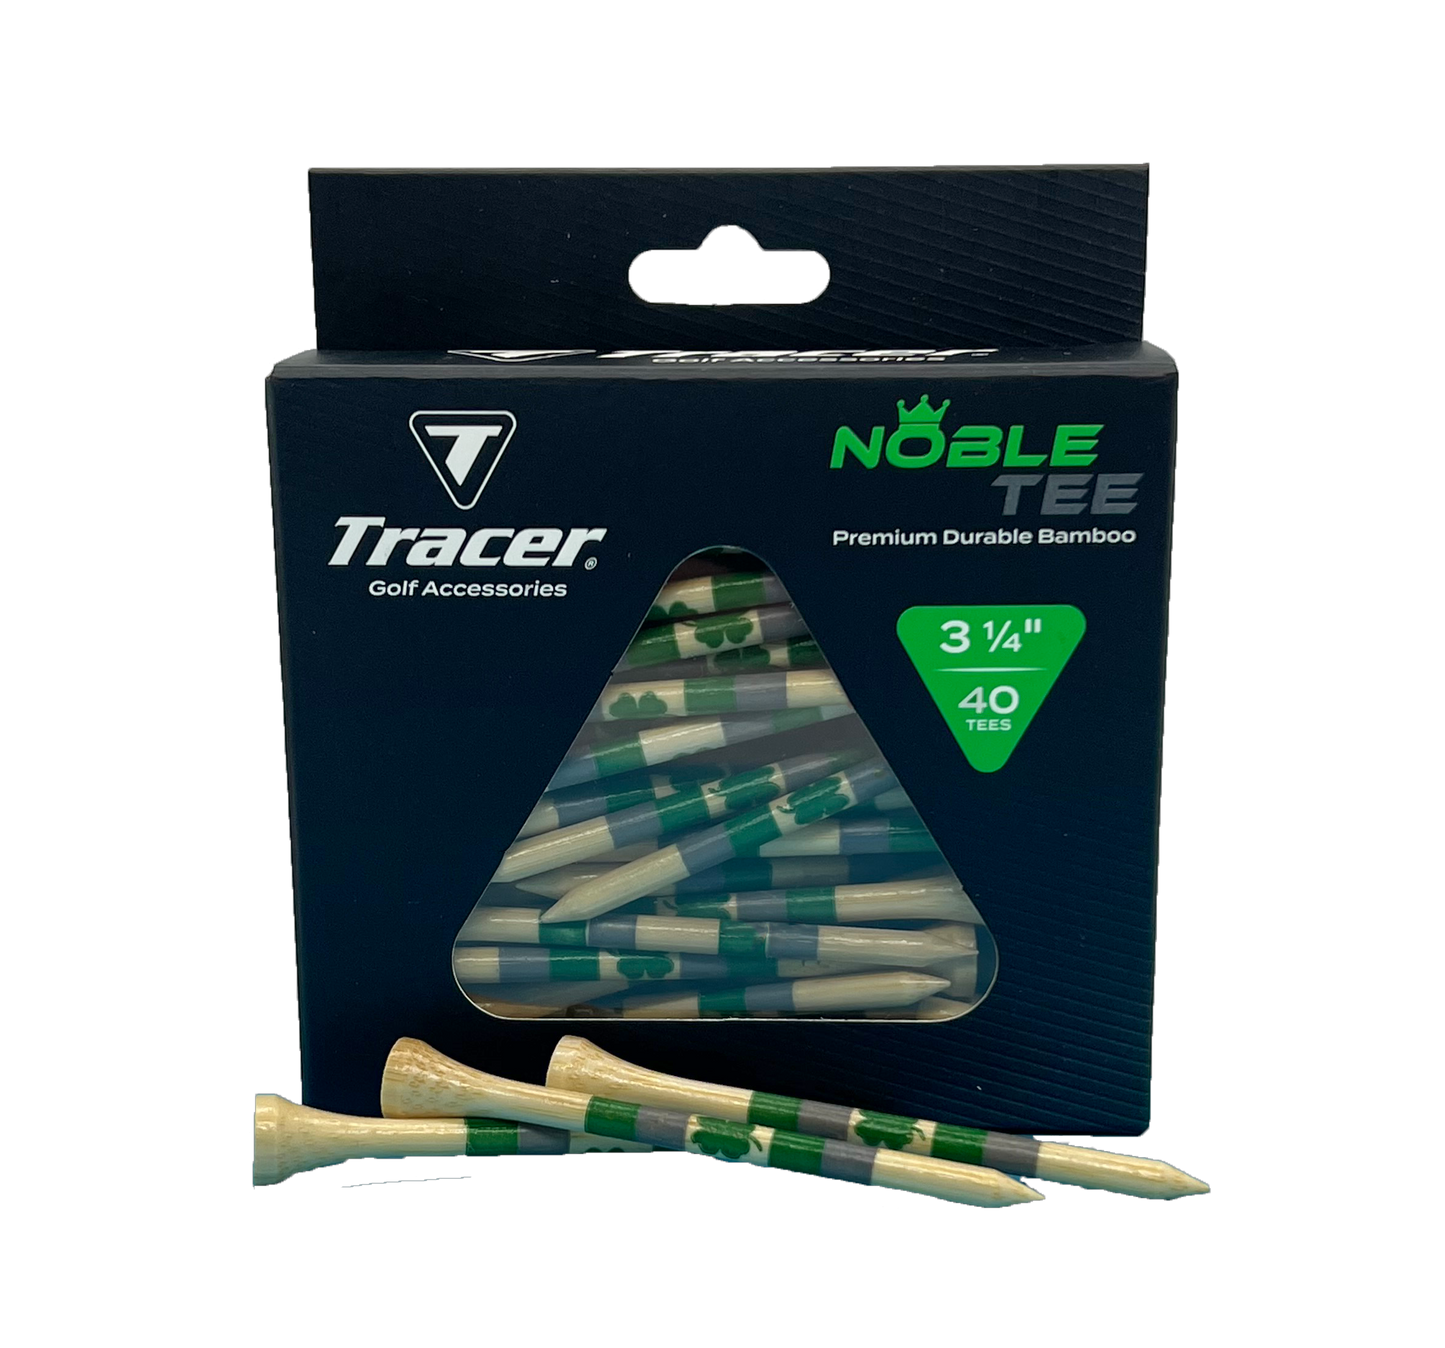 *NEW* Tracer Noble Tees - 3 1/4"